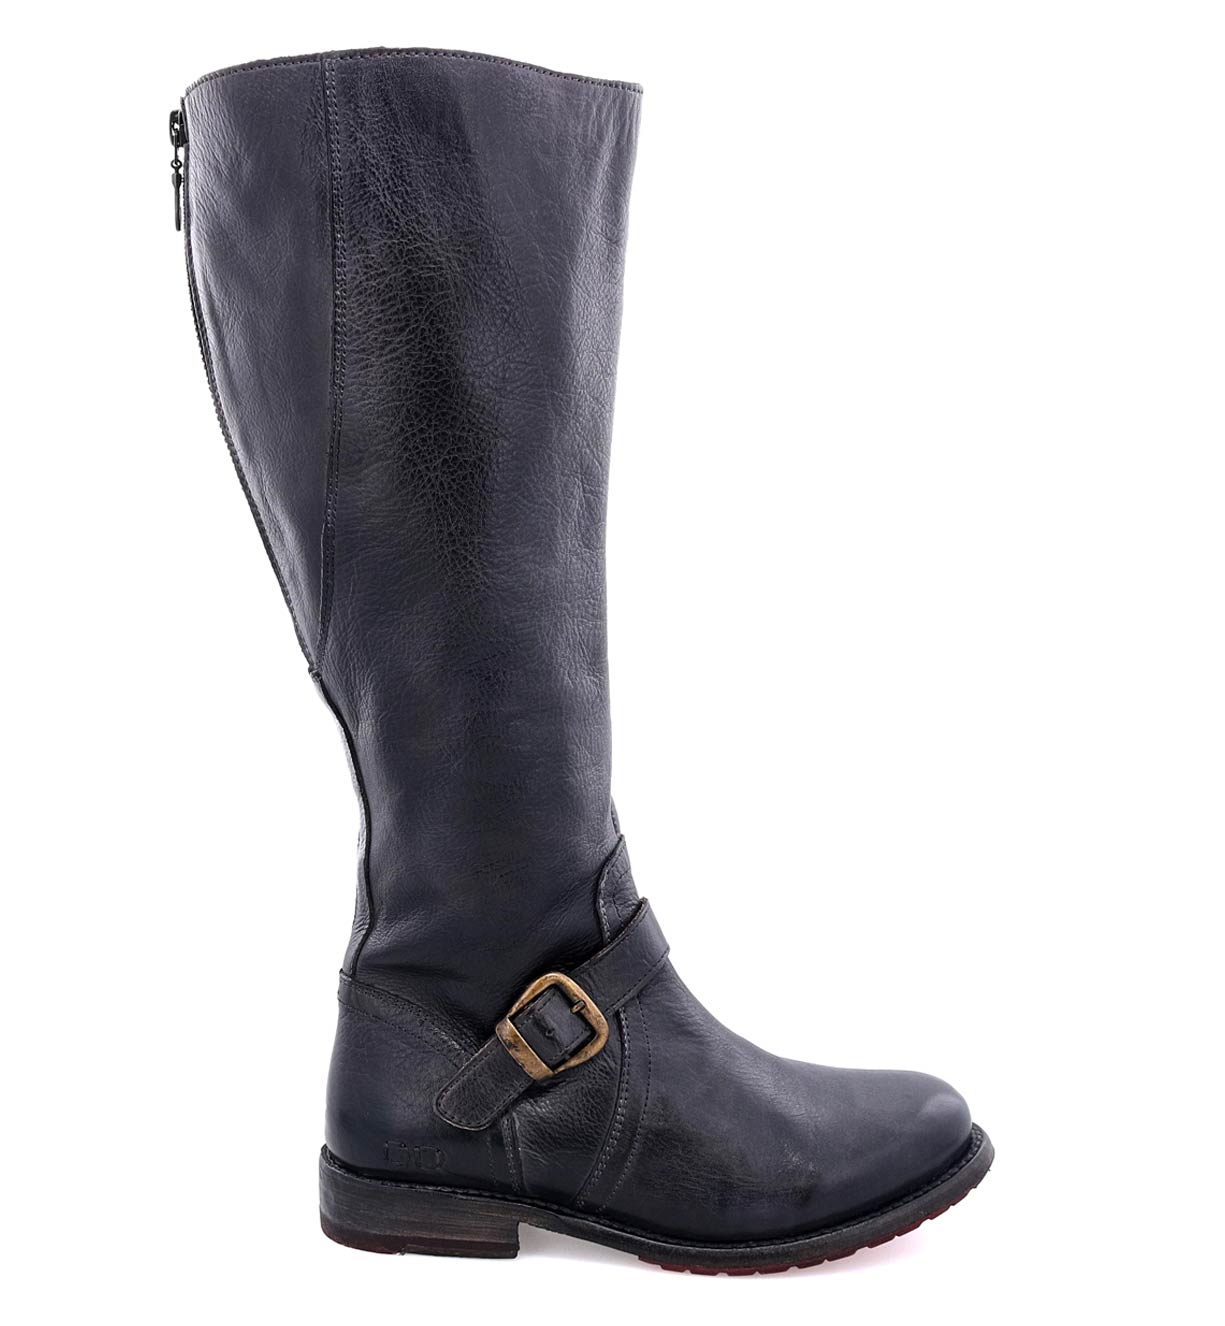 A women's black leather Glaye Wide Calf boot with buckles on the side by Bed Stu.